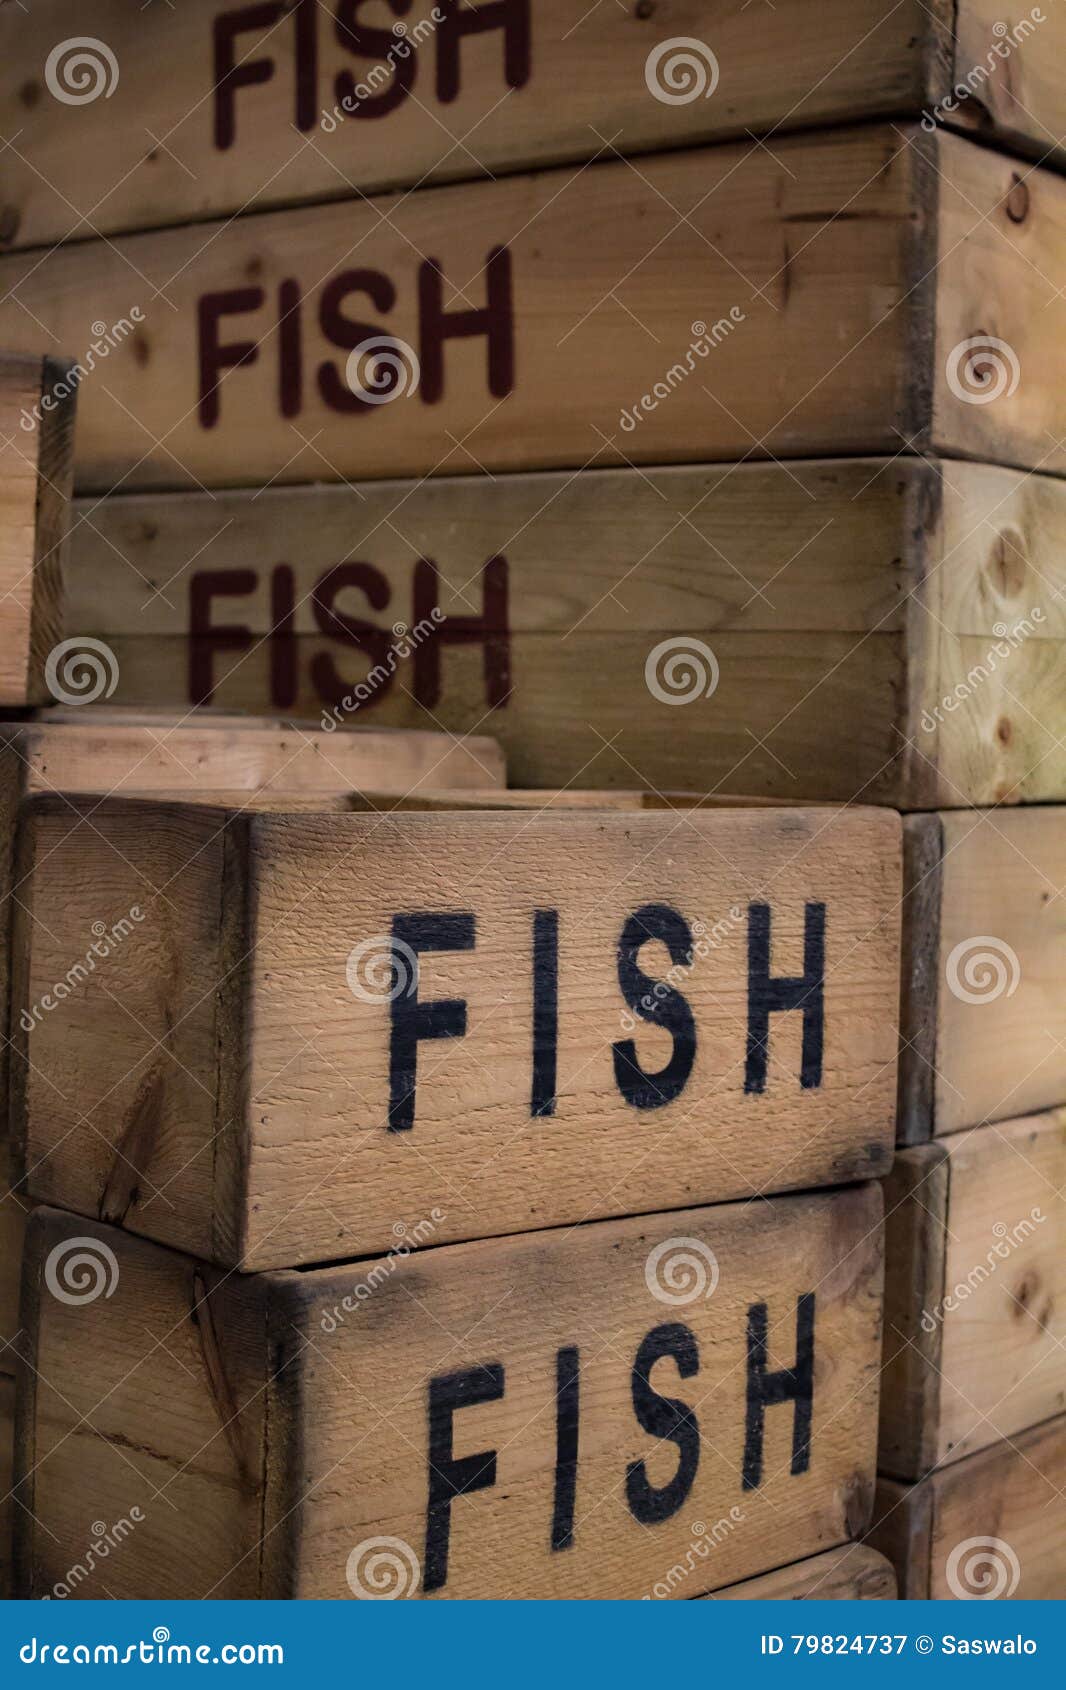 Vintage Fish Crates stock image. Image of wooden, background - 79824737